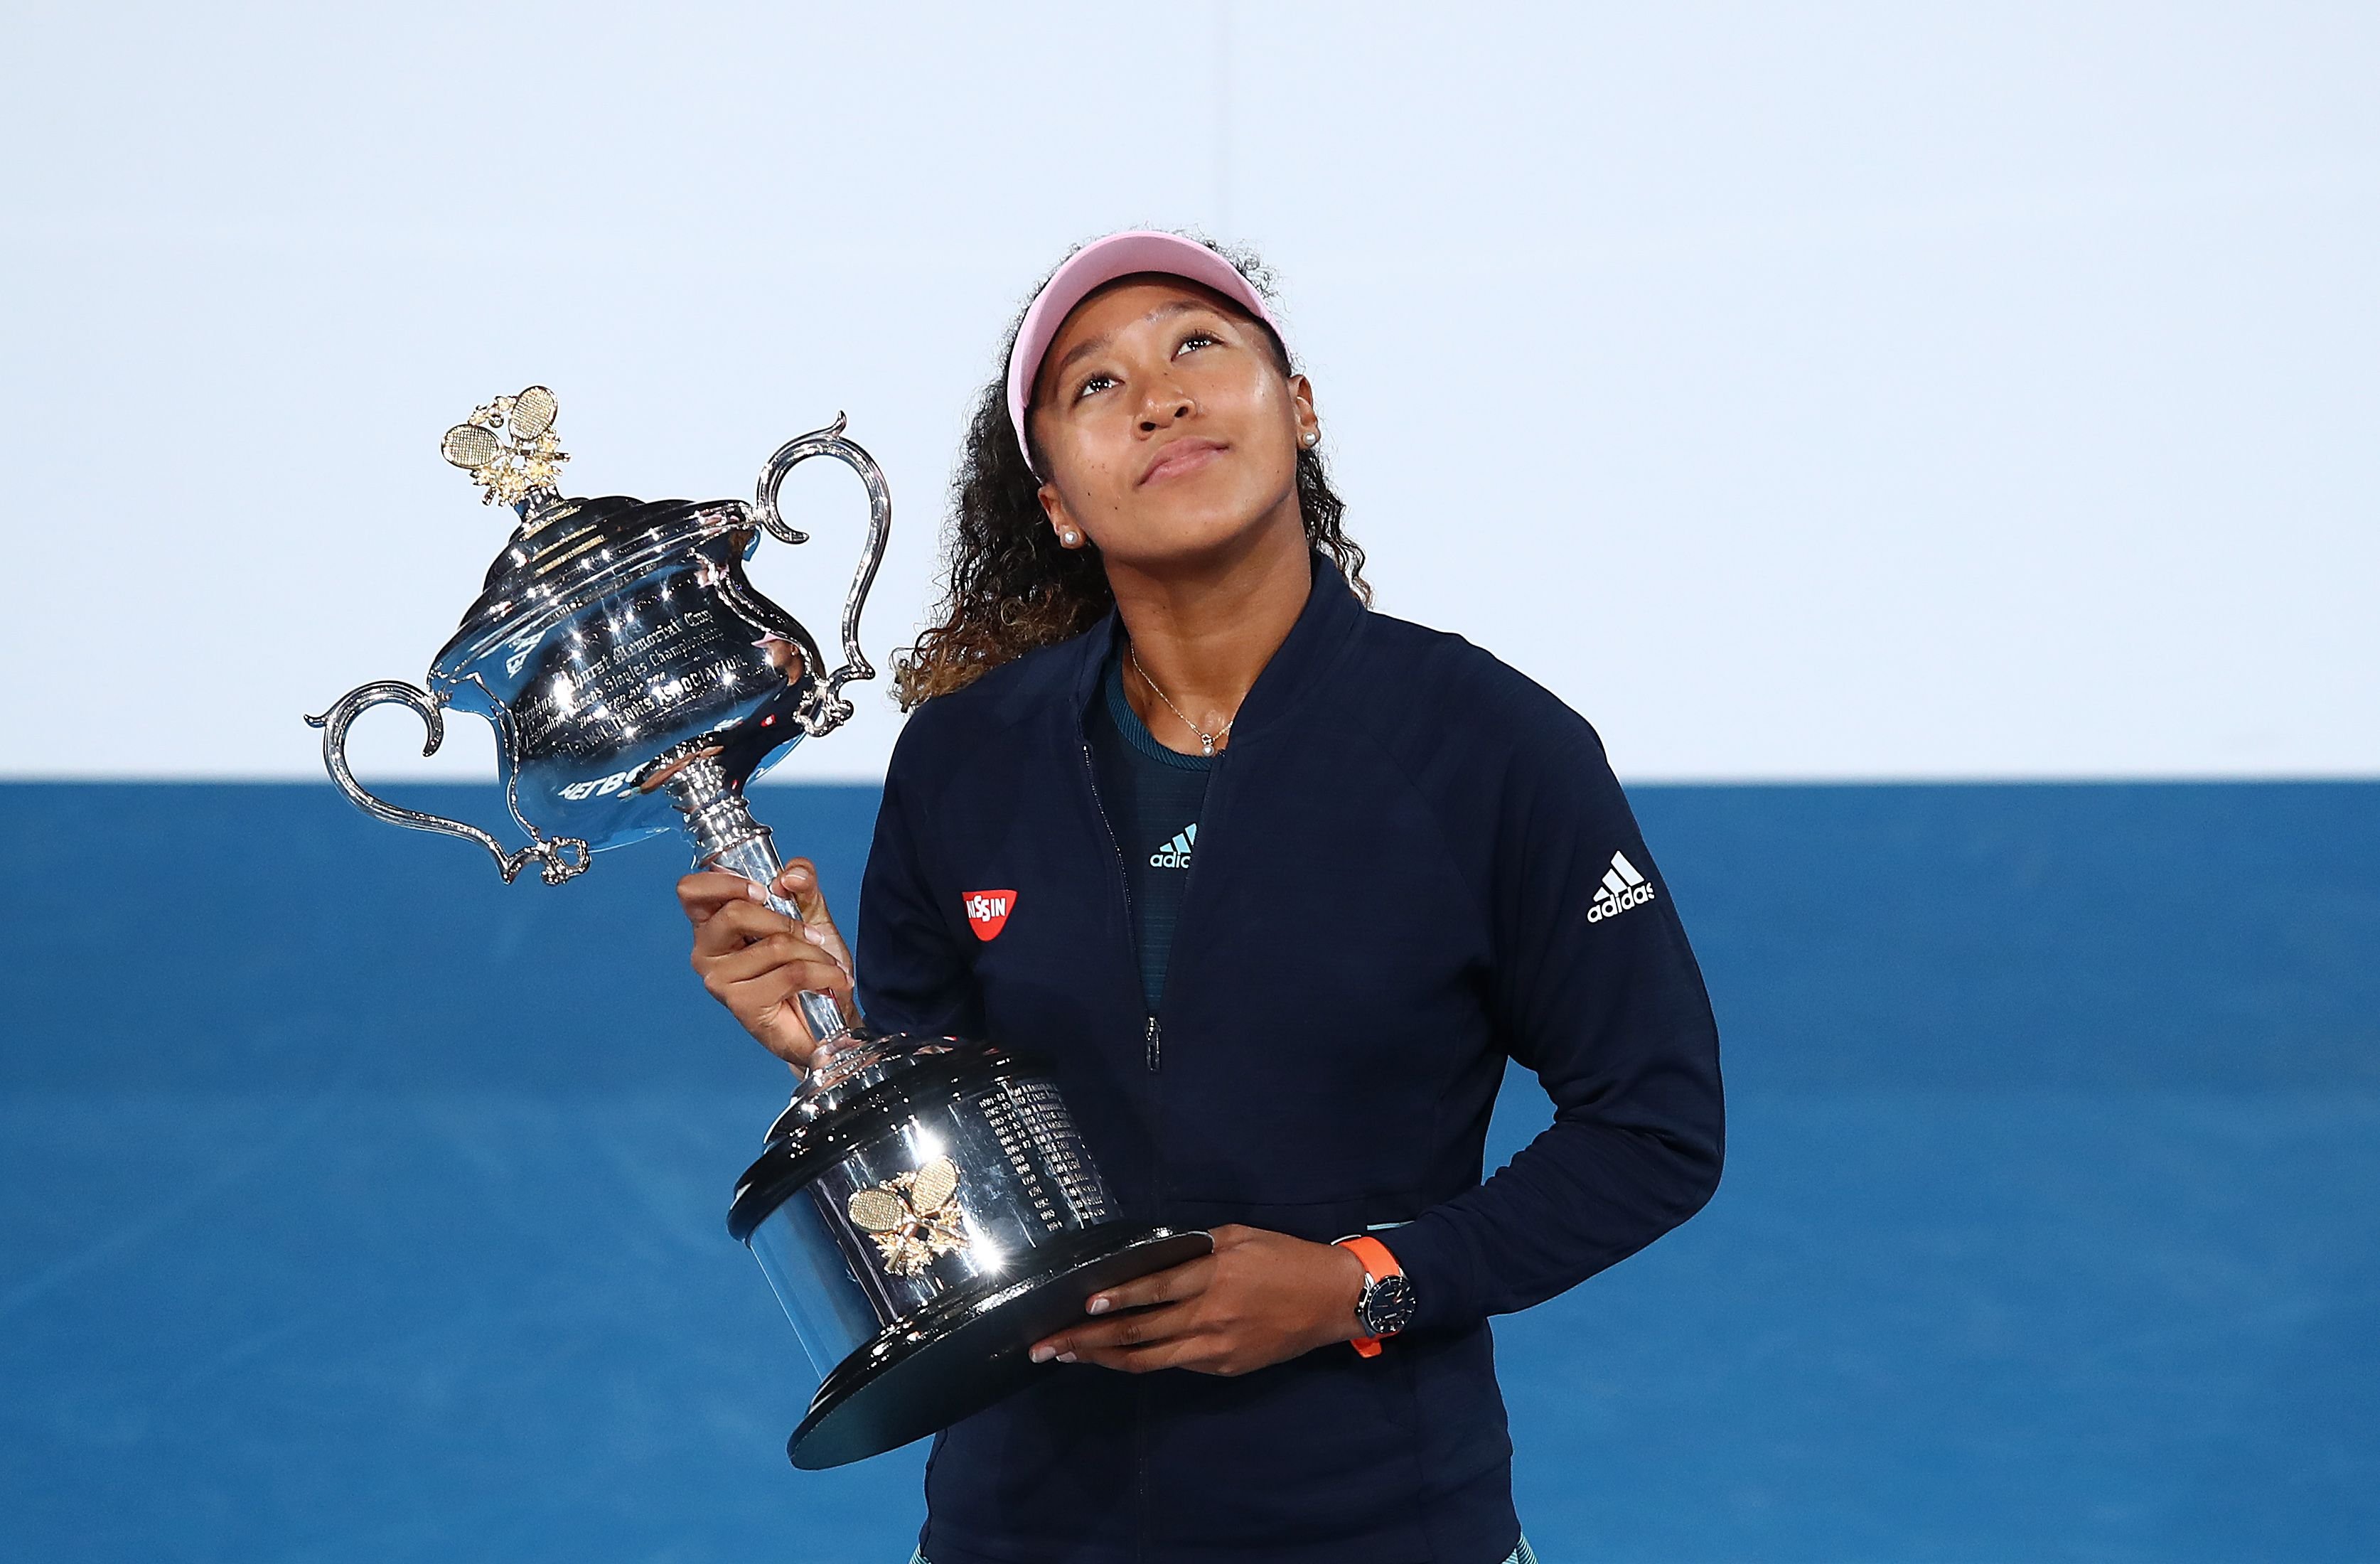 Naomi Osaka with the Daphne Akhurst at Melbourne Park on January 26, 2019 in Melbourne, Australia. | Source: Getty Images